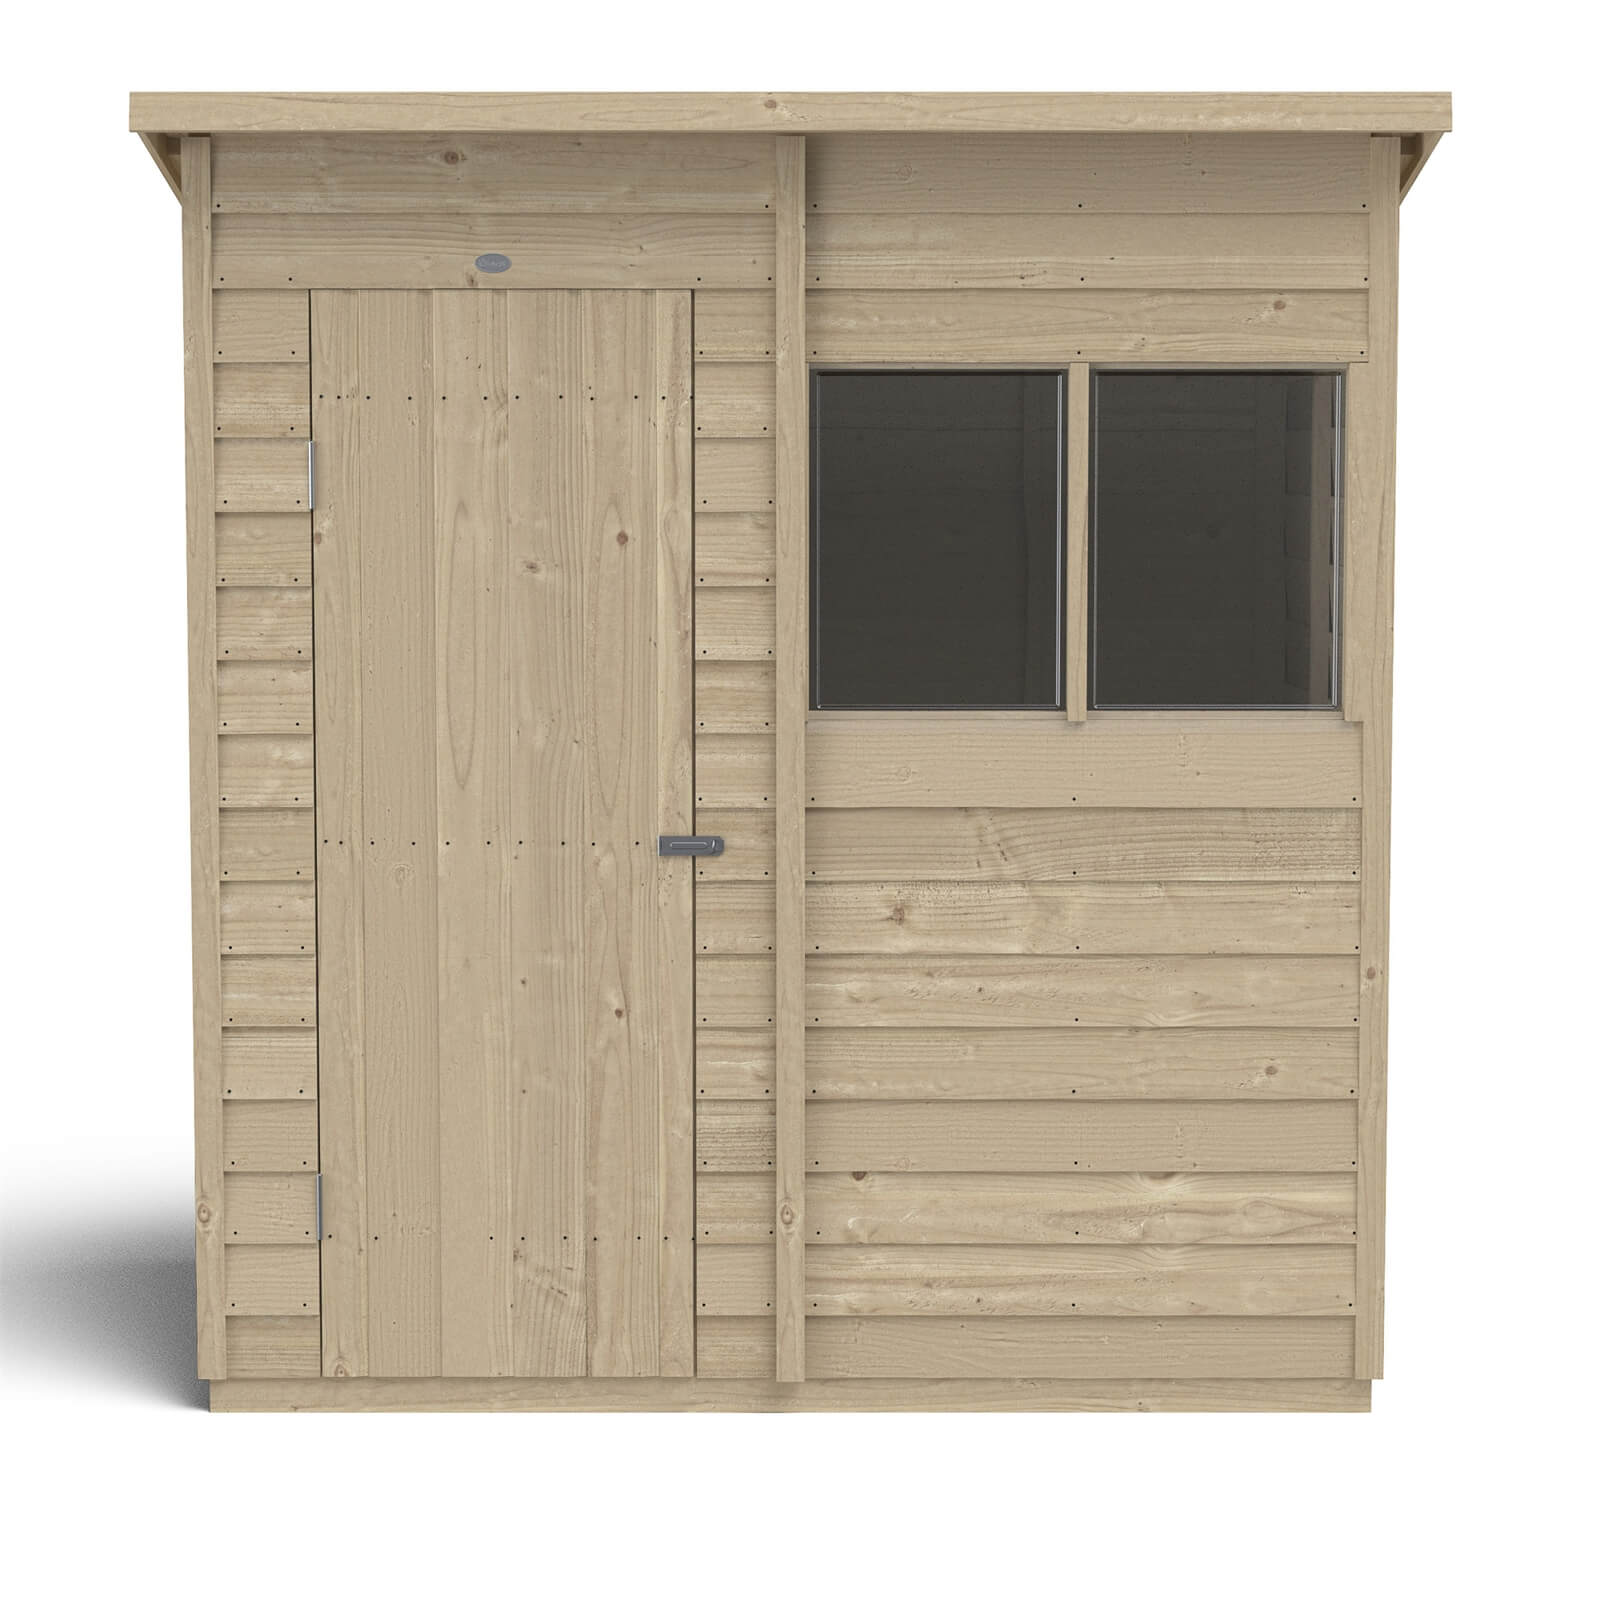 Forest 6 x 4ft Overlap Pressure Treated Pent Shed